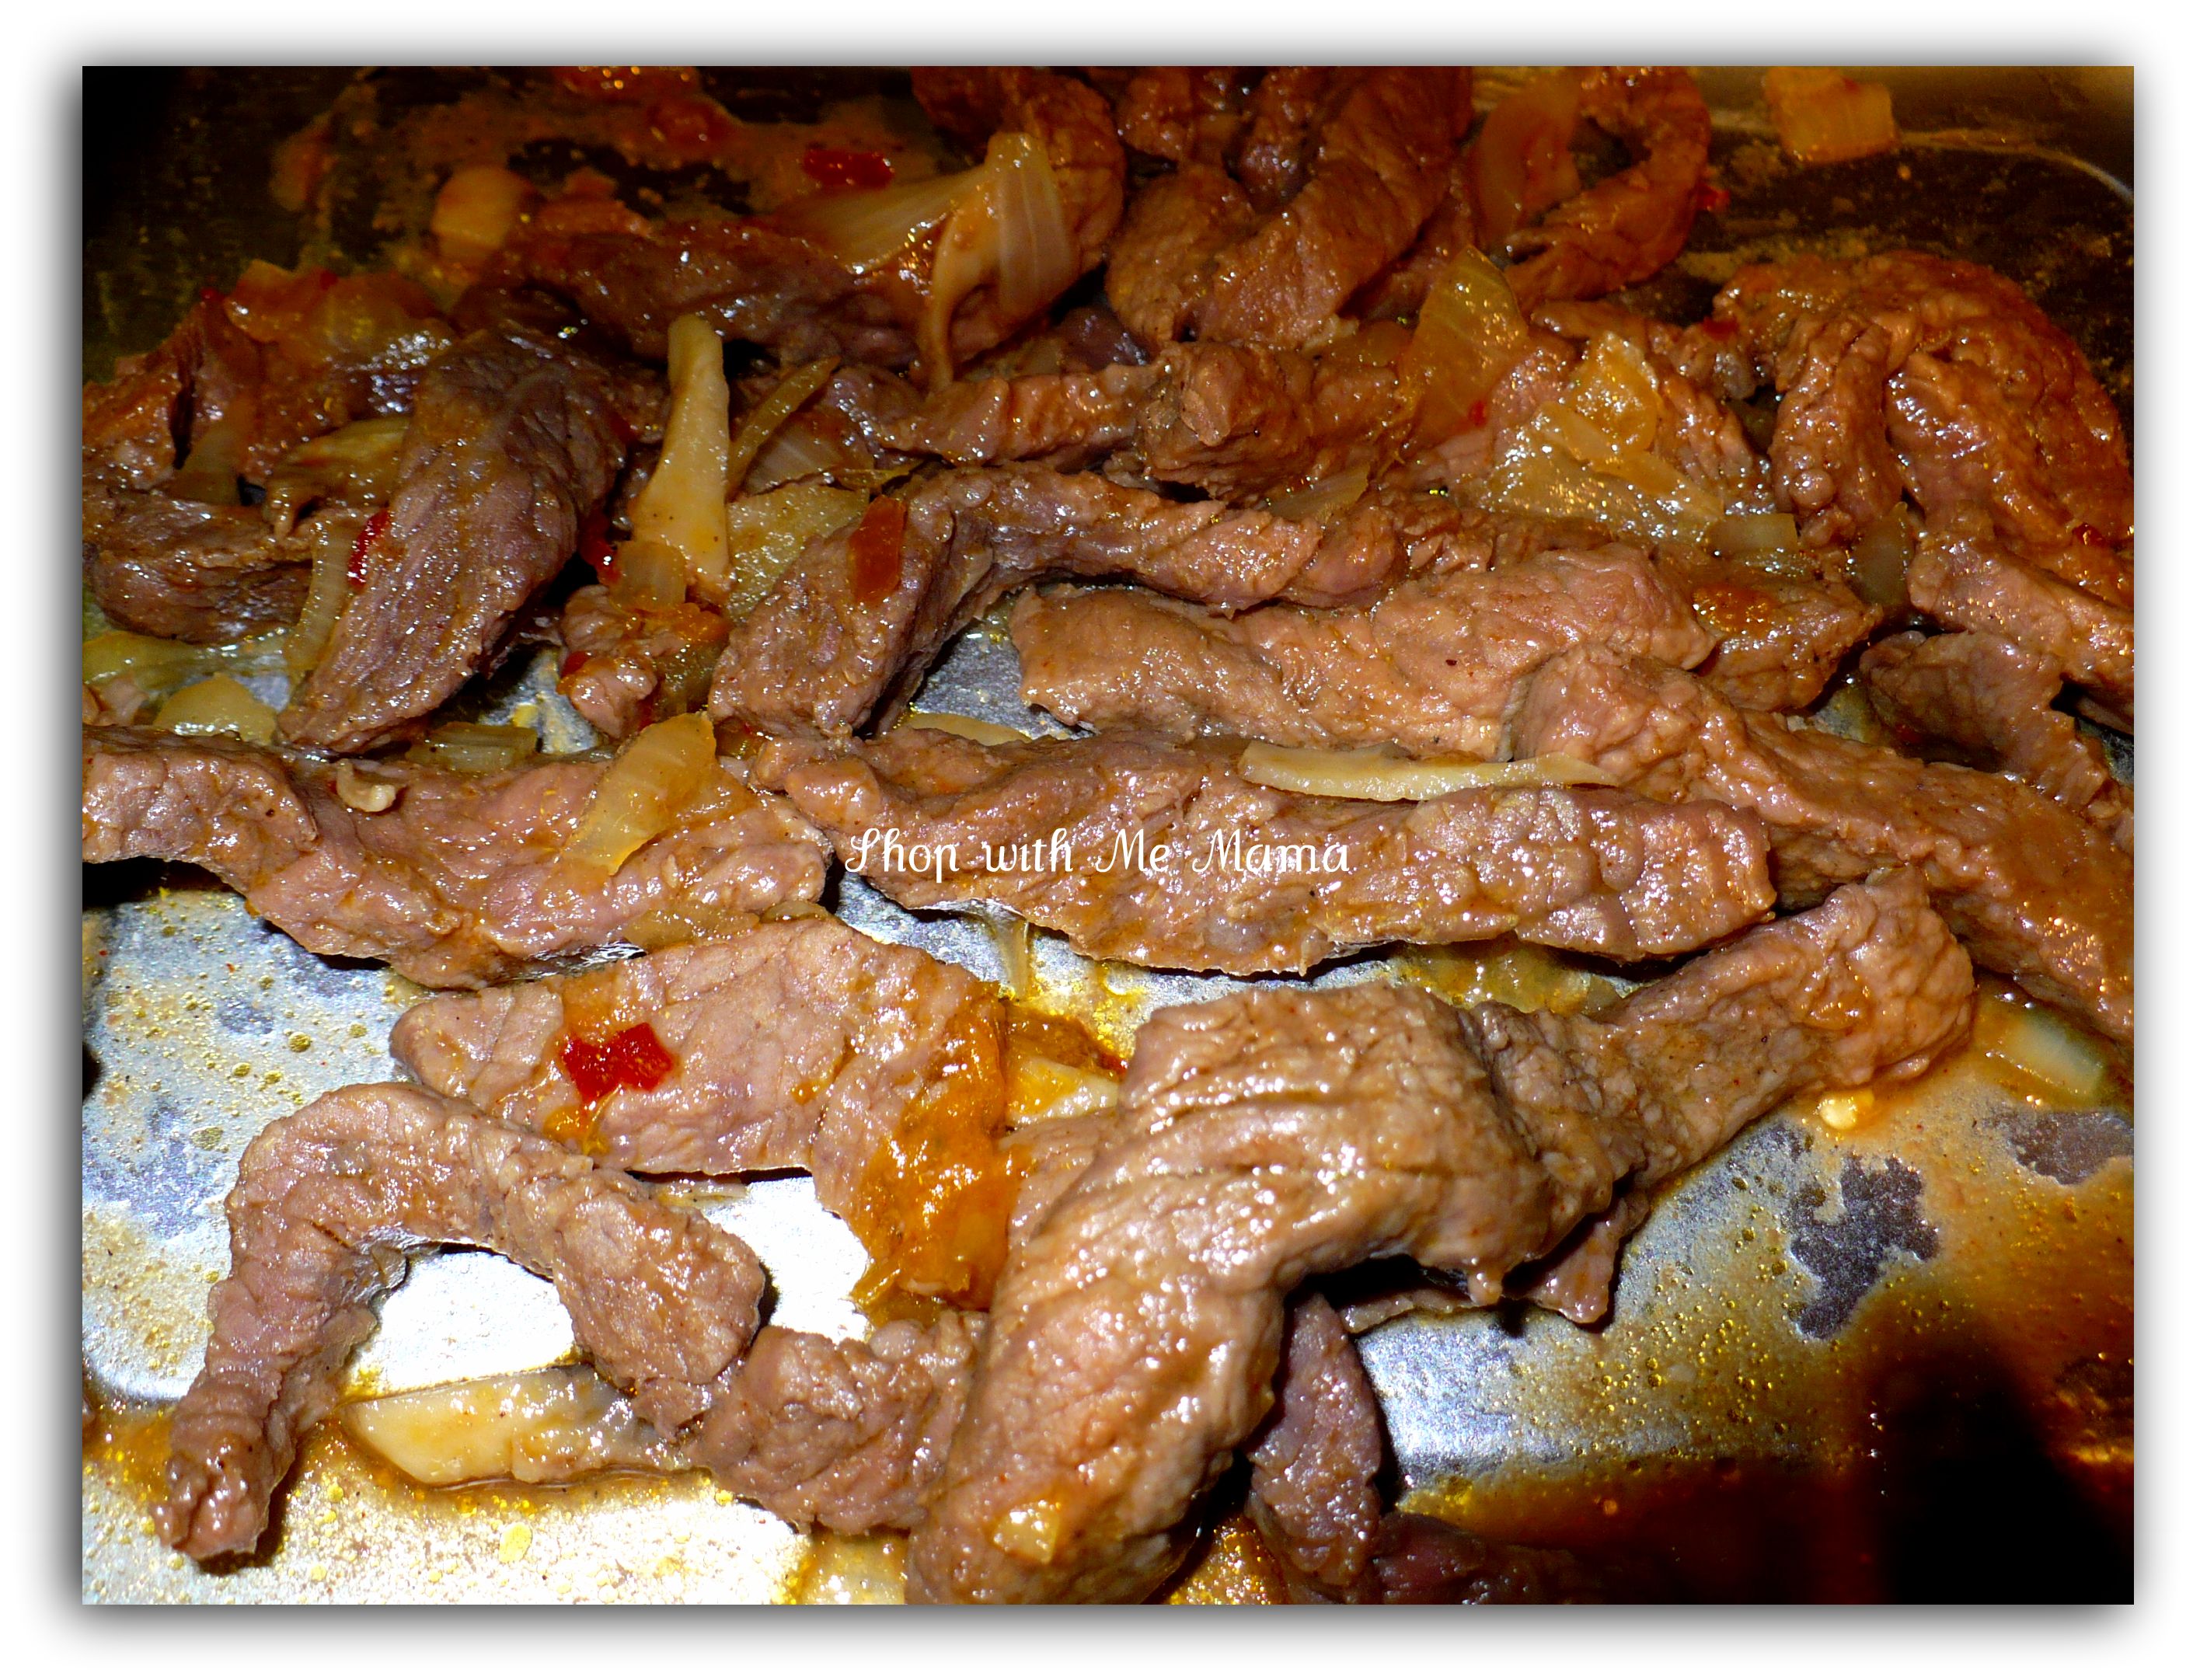 Sweet & Spicy Steak with Onion, Mushrooms & Swiss Cheese